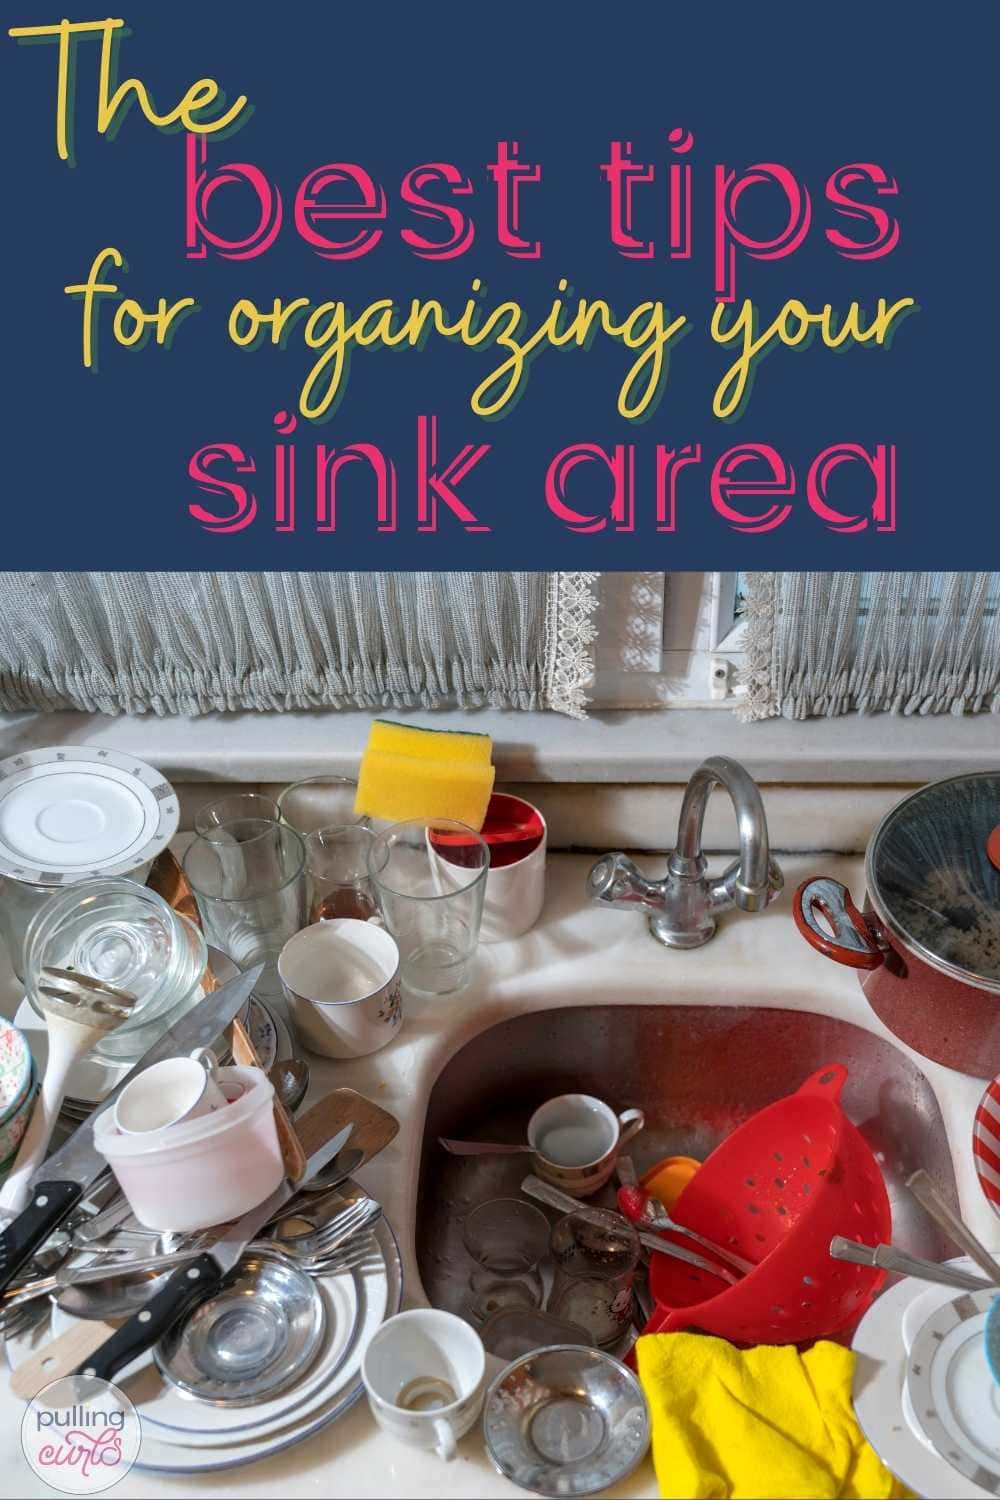 Top of the kitchen sink organization is imperative to cleaning up your kitchen quickly and effectively. Even if it's small, on an island or you just need to DIY something, this post has the tools for you! via @pullingcurls